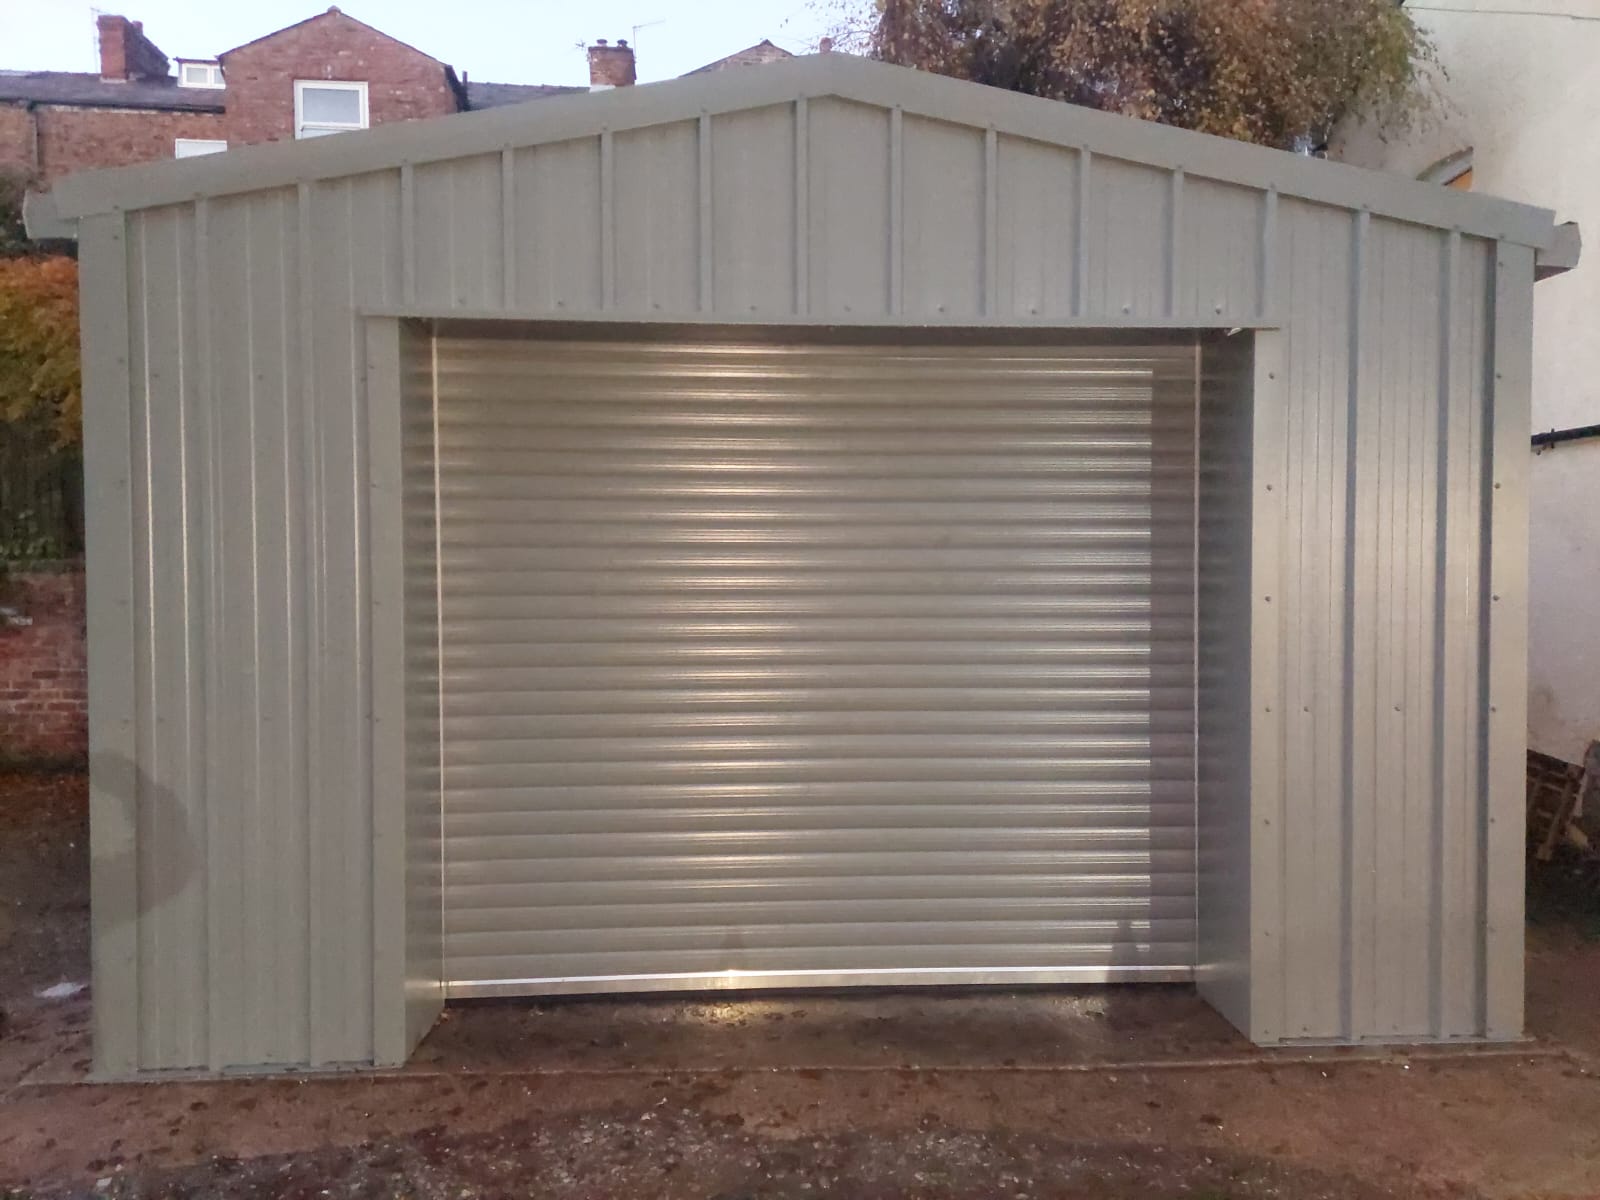 Agricultural Steel Buildings With Anti-Drip Cladding